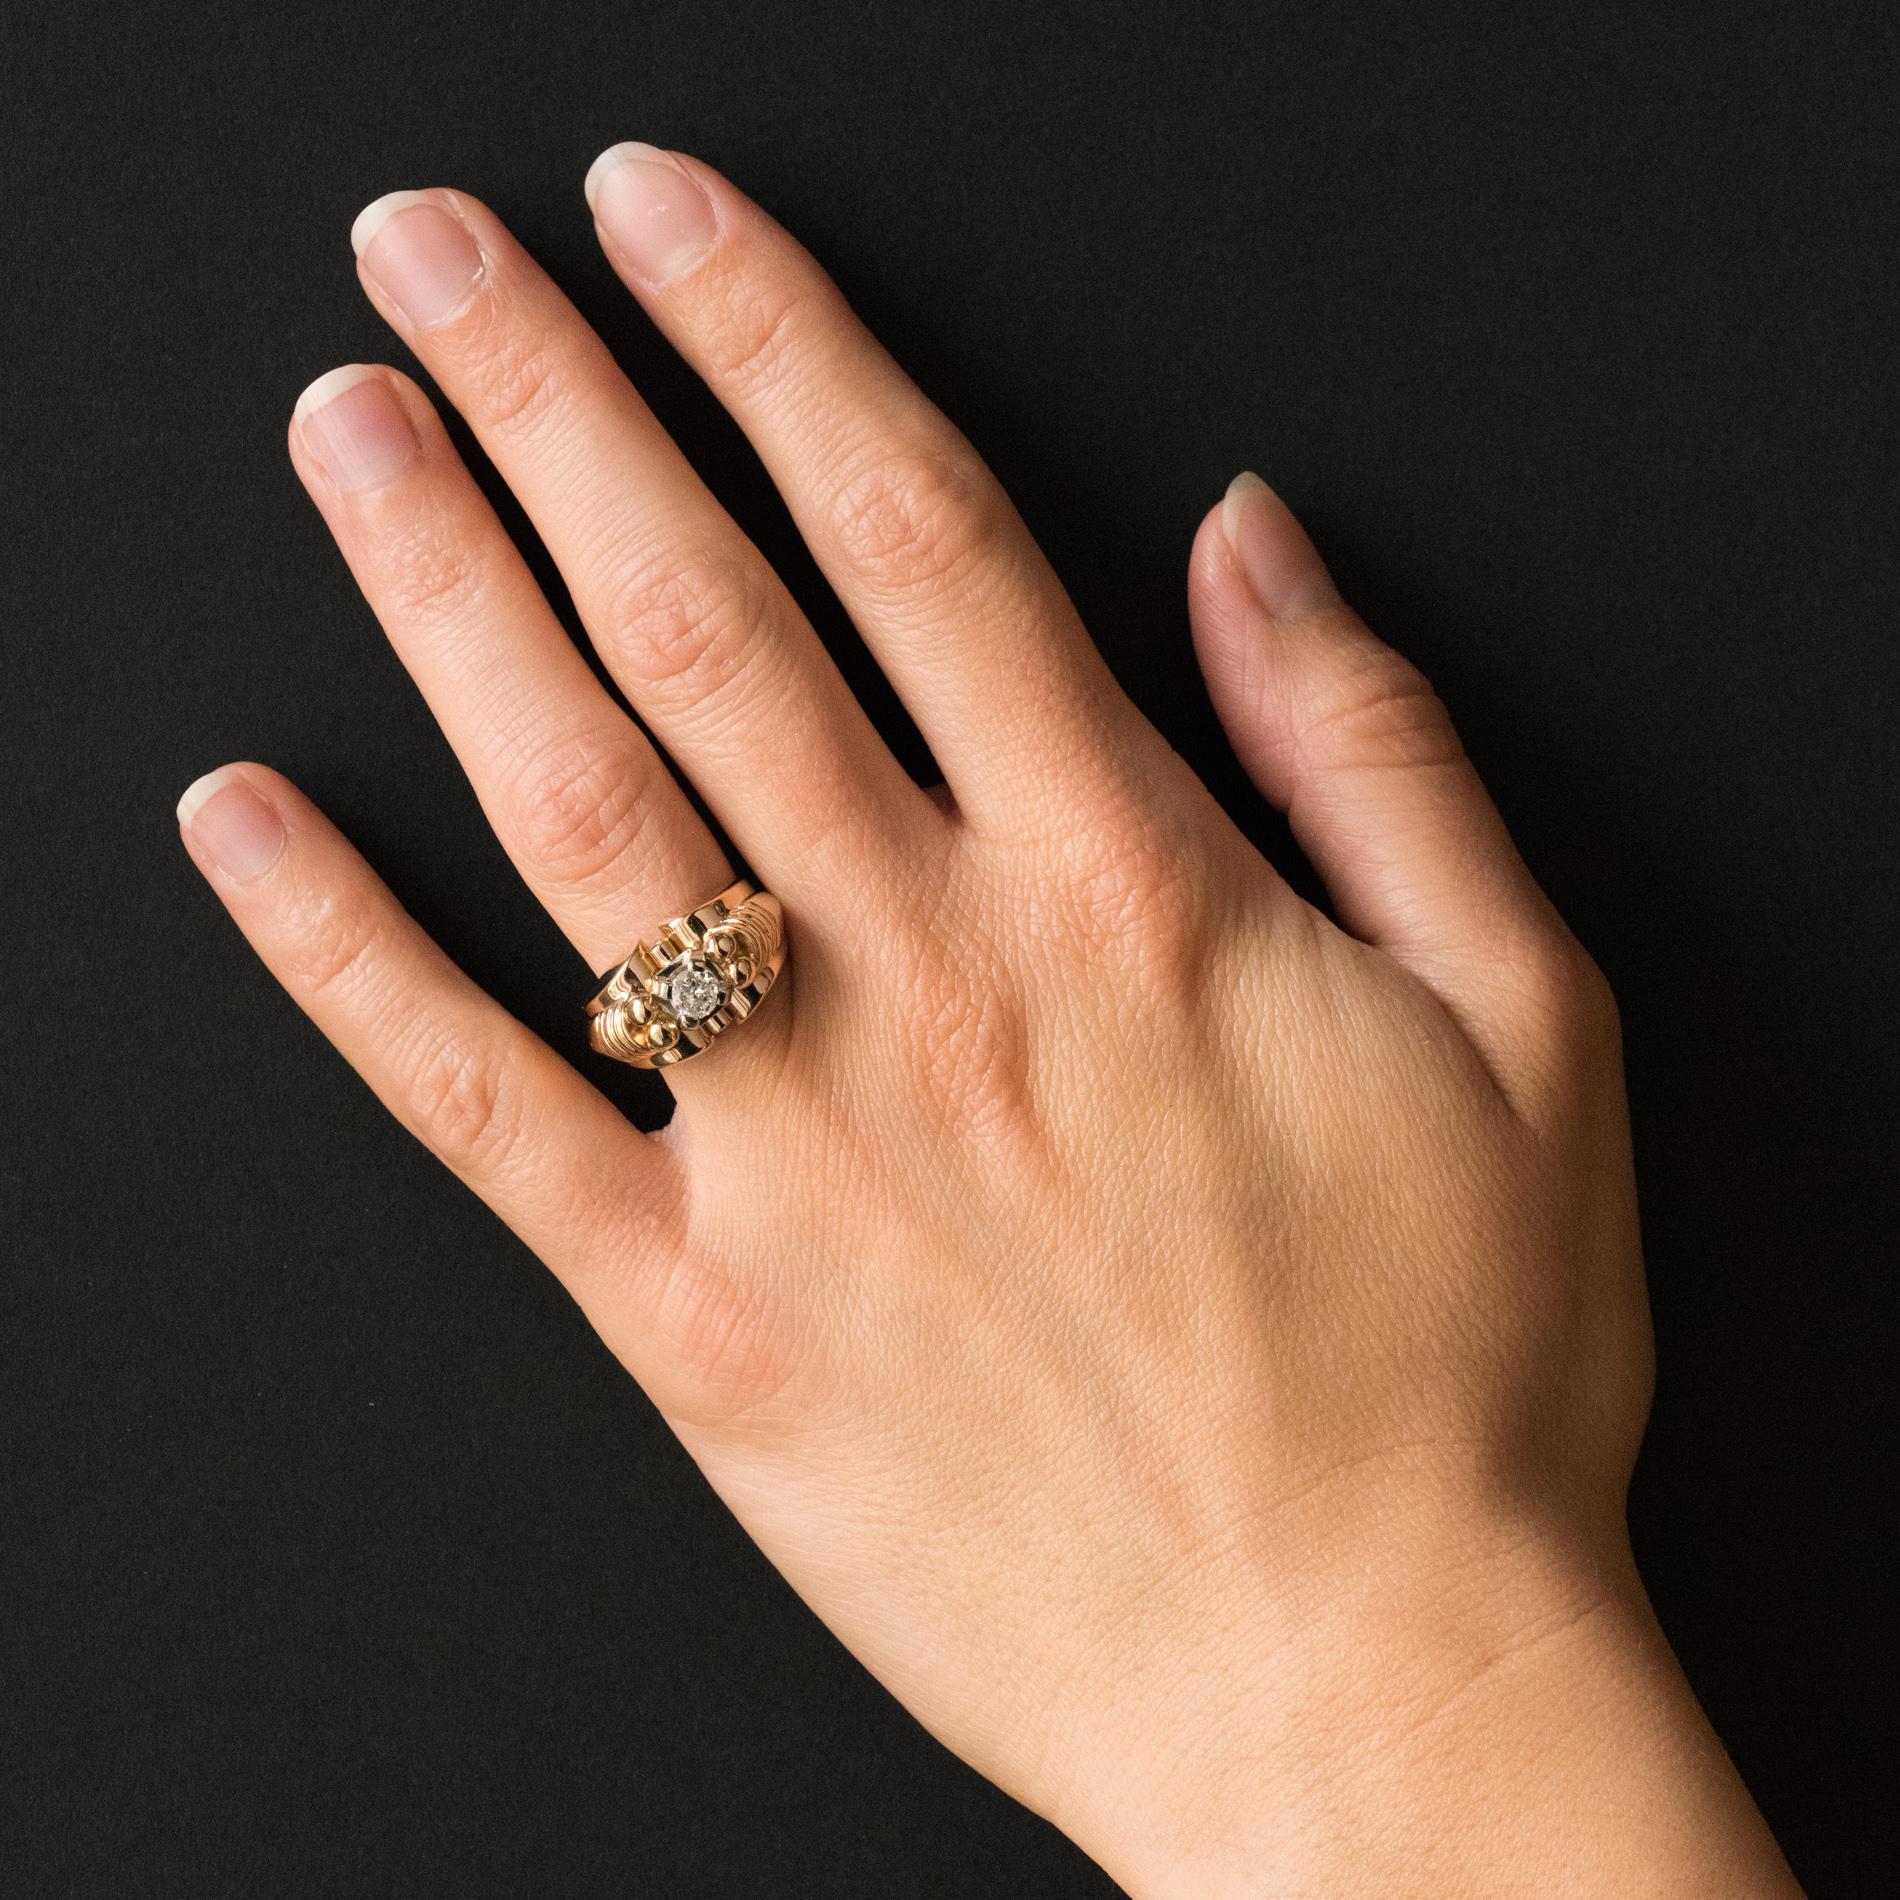 Ring in 18 Karats yellow gold, eagle's head hallmark,  and platinum, dog's head hallmark.
Beautiful and massive tank ring, it is set on platinum of an antique brilliant- cut diamond. On both sides of the diamond, 2 gold pearls and a gadrooned